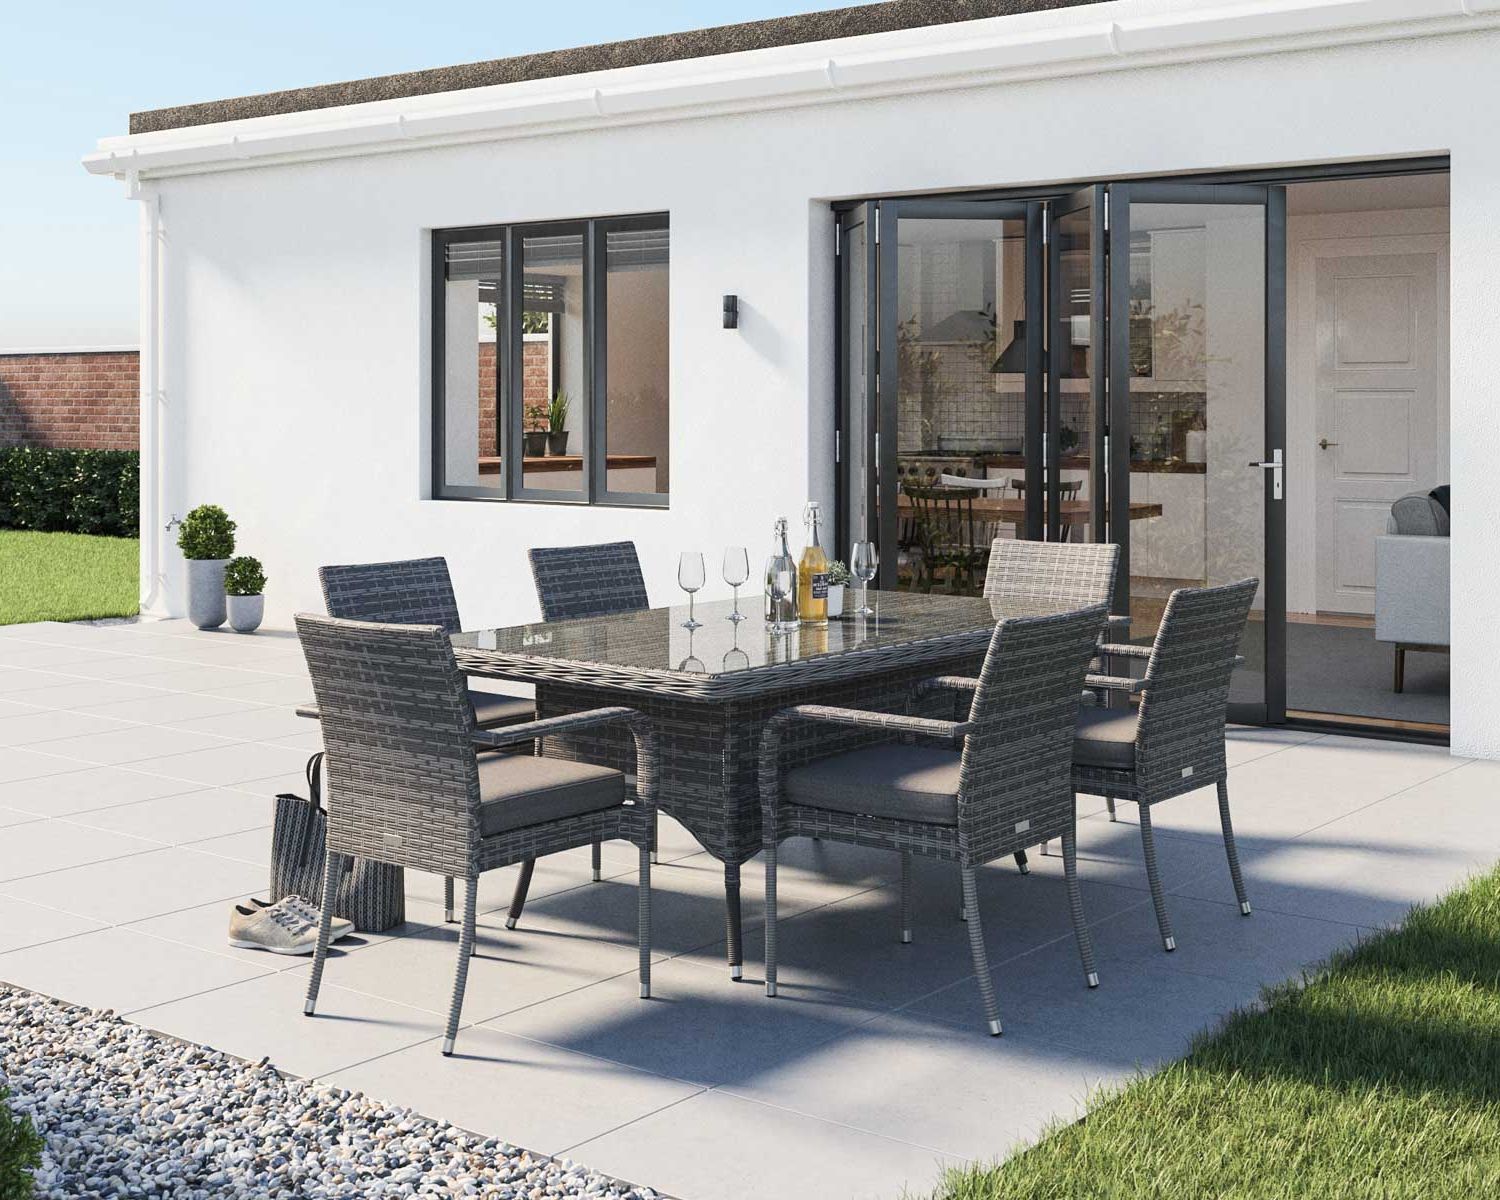 6 Seat Rattan Garden Dining Set With Rectangular Dining Table In Grey Intended For Most Current Gray Wicker Rectangular Patio Dining Sets (View 1 of 15)